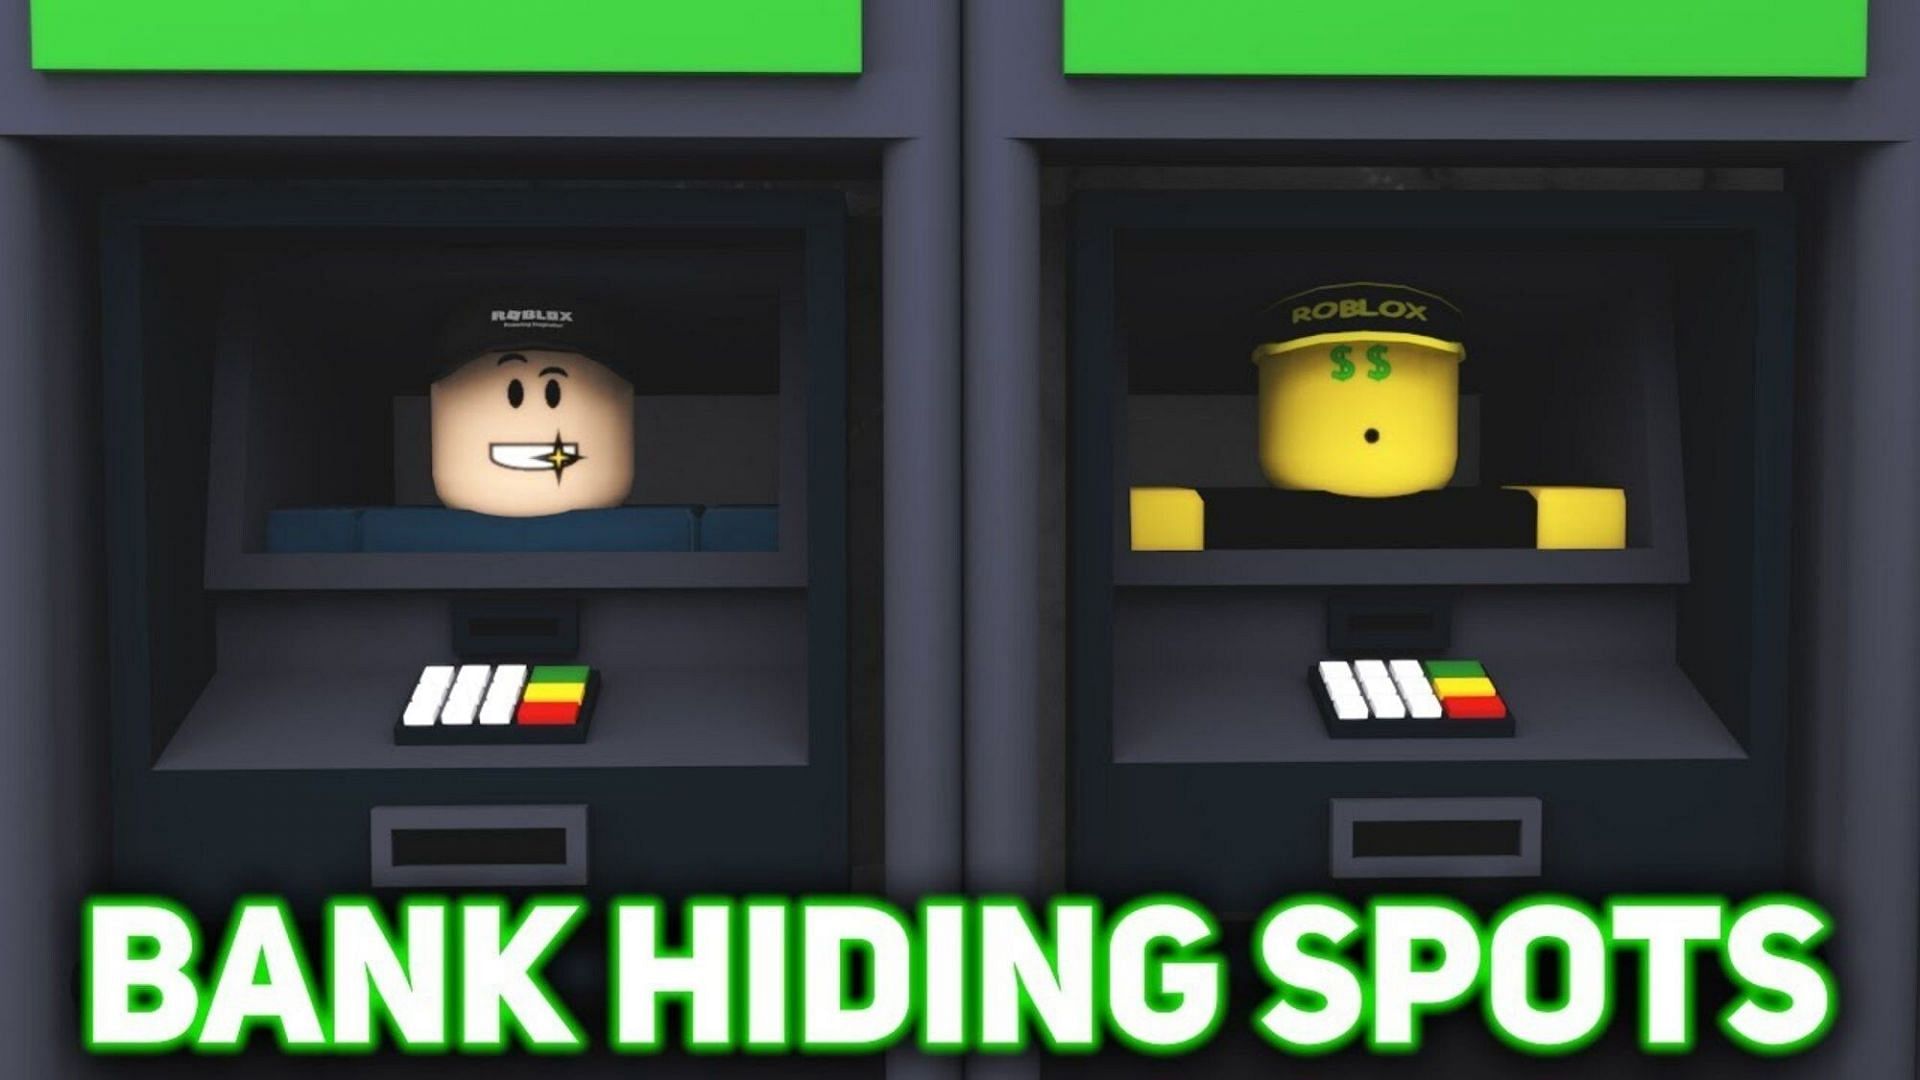 Secretive places to hide in Bank 2 of Roblox Murder Mystery 2 (Image via YouTube)